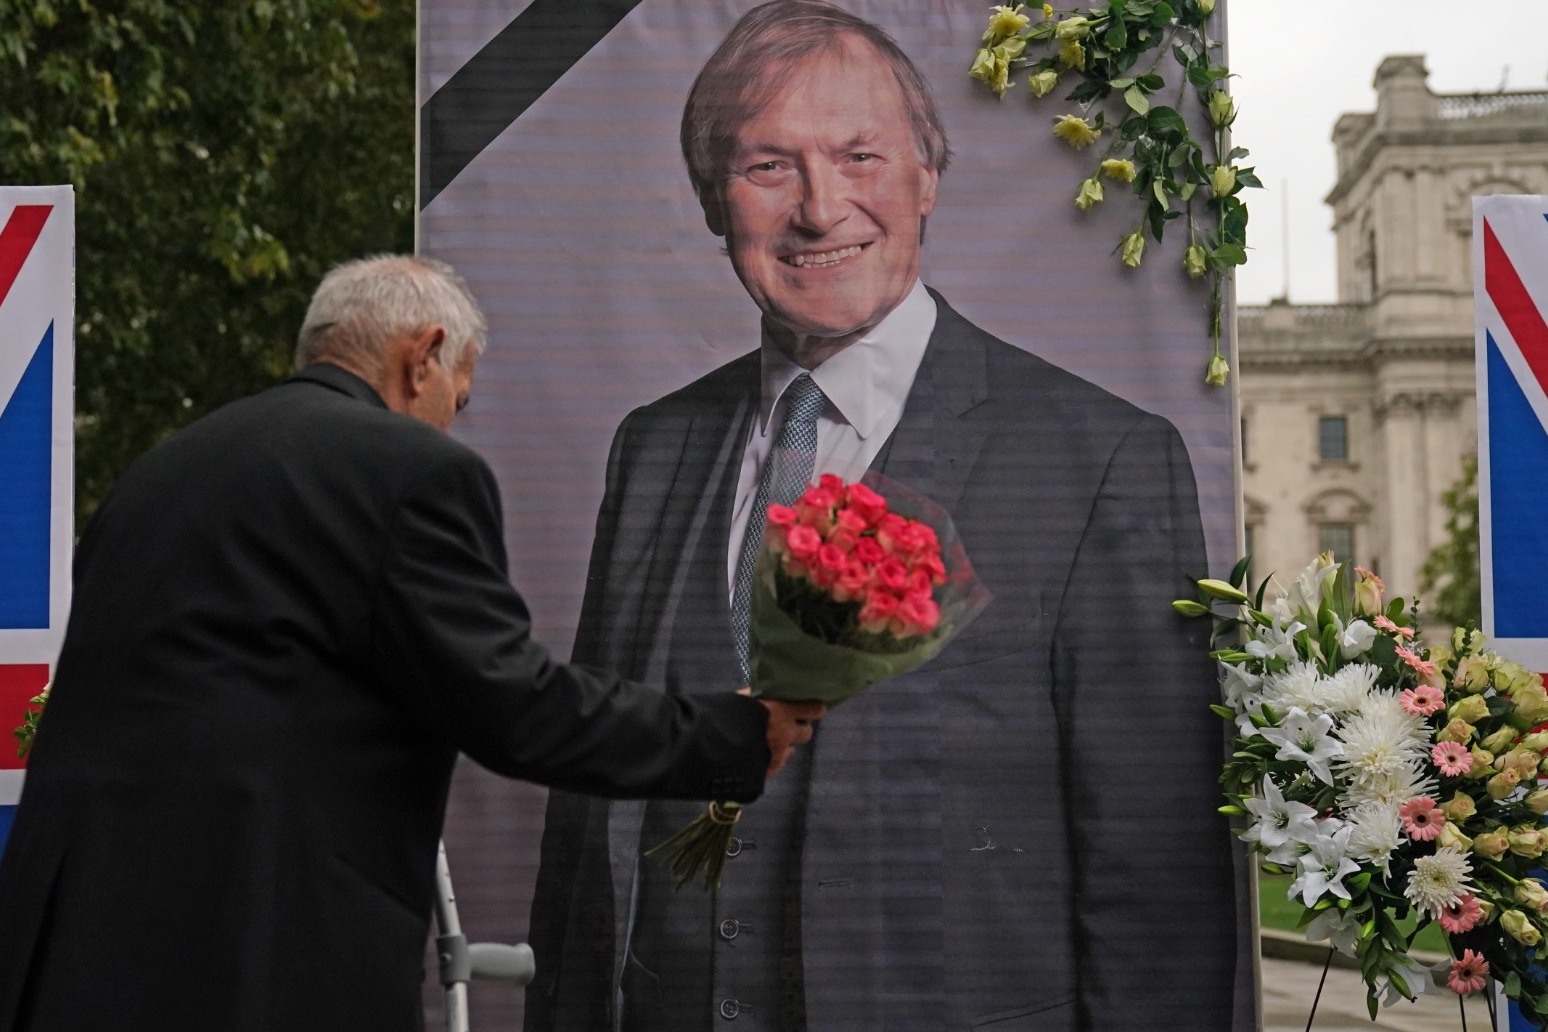 Man accused of murdering MP Sir David Amess to appear at Old Bailey 